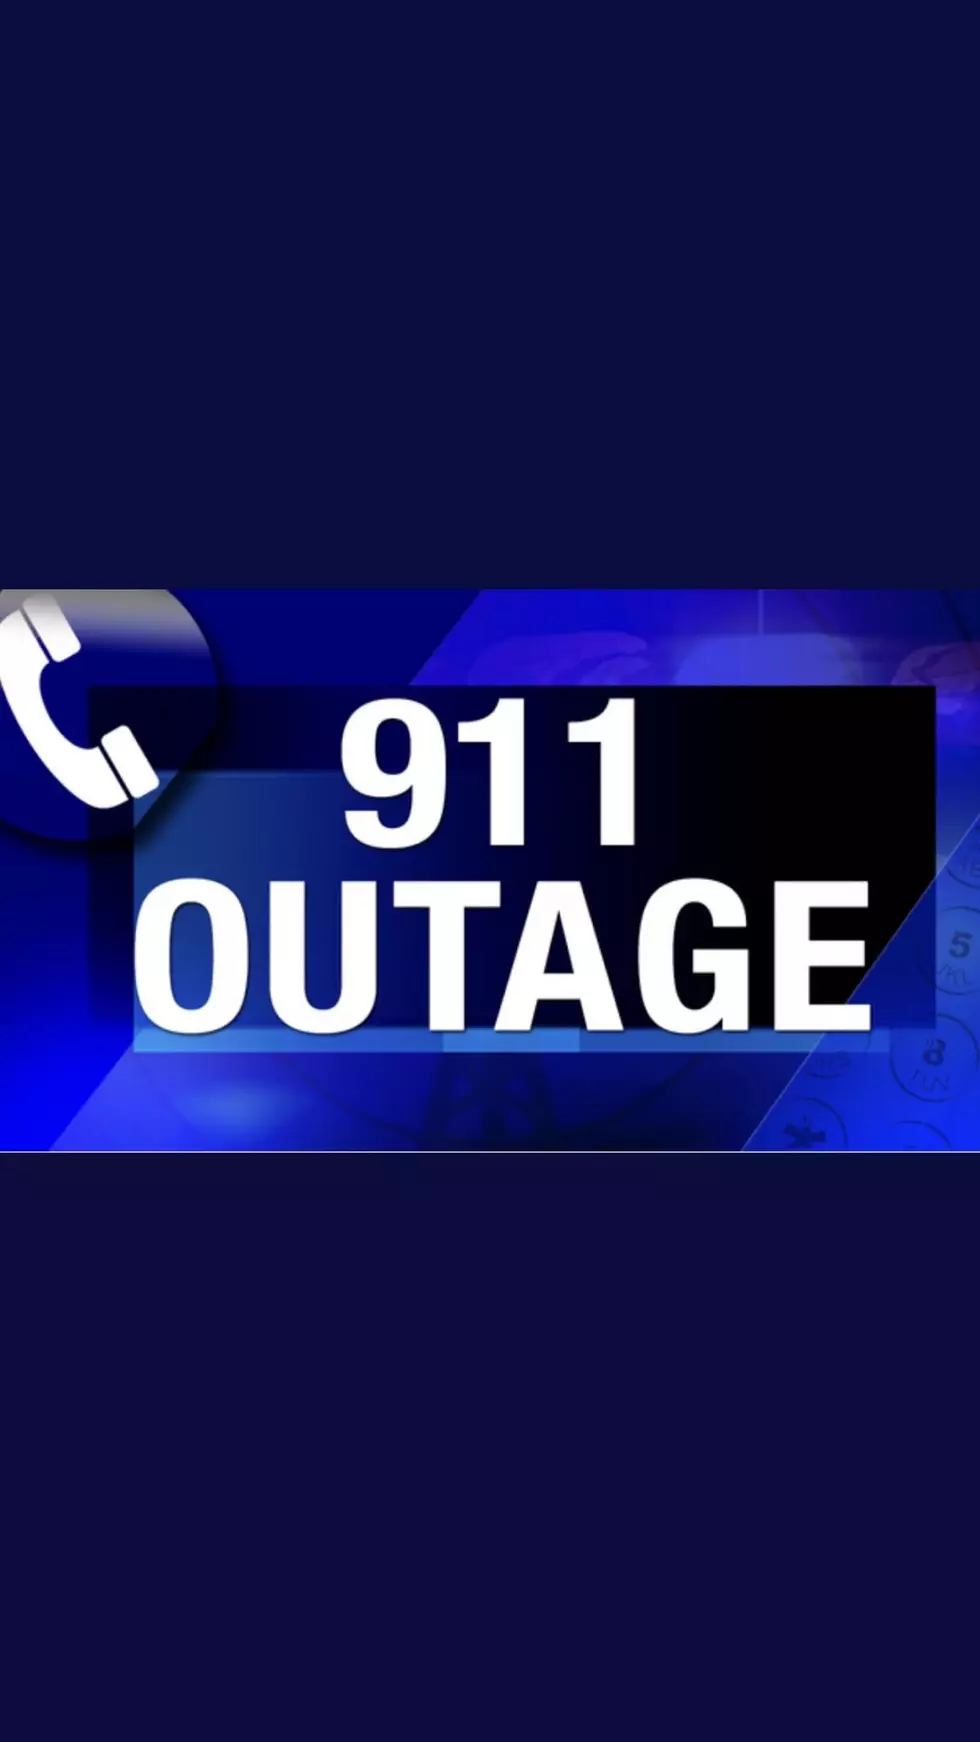 WA State 911 outage connected to Century Link issues